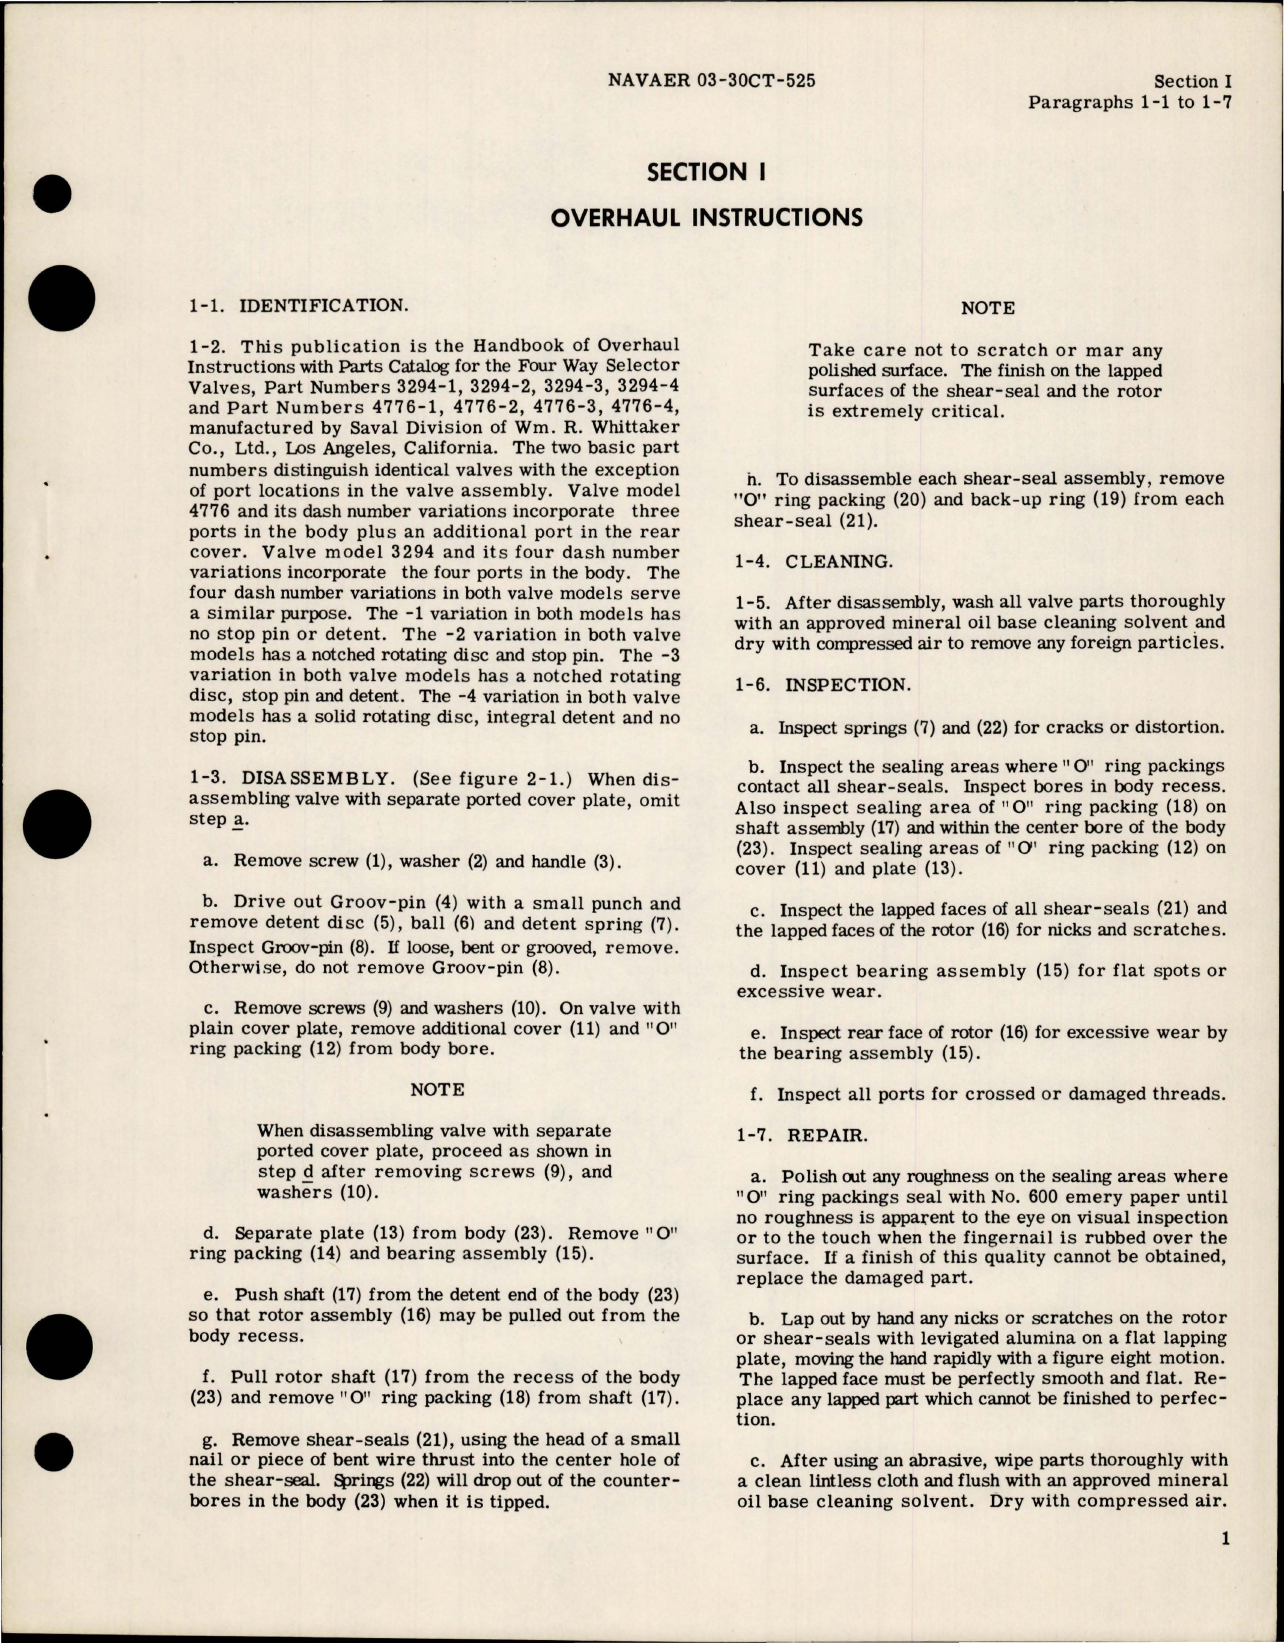 Sample page 5 from AirCorps Library document: Overhaul Instructions with Parts Catalog for Four Way Selector Valve